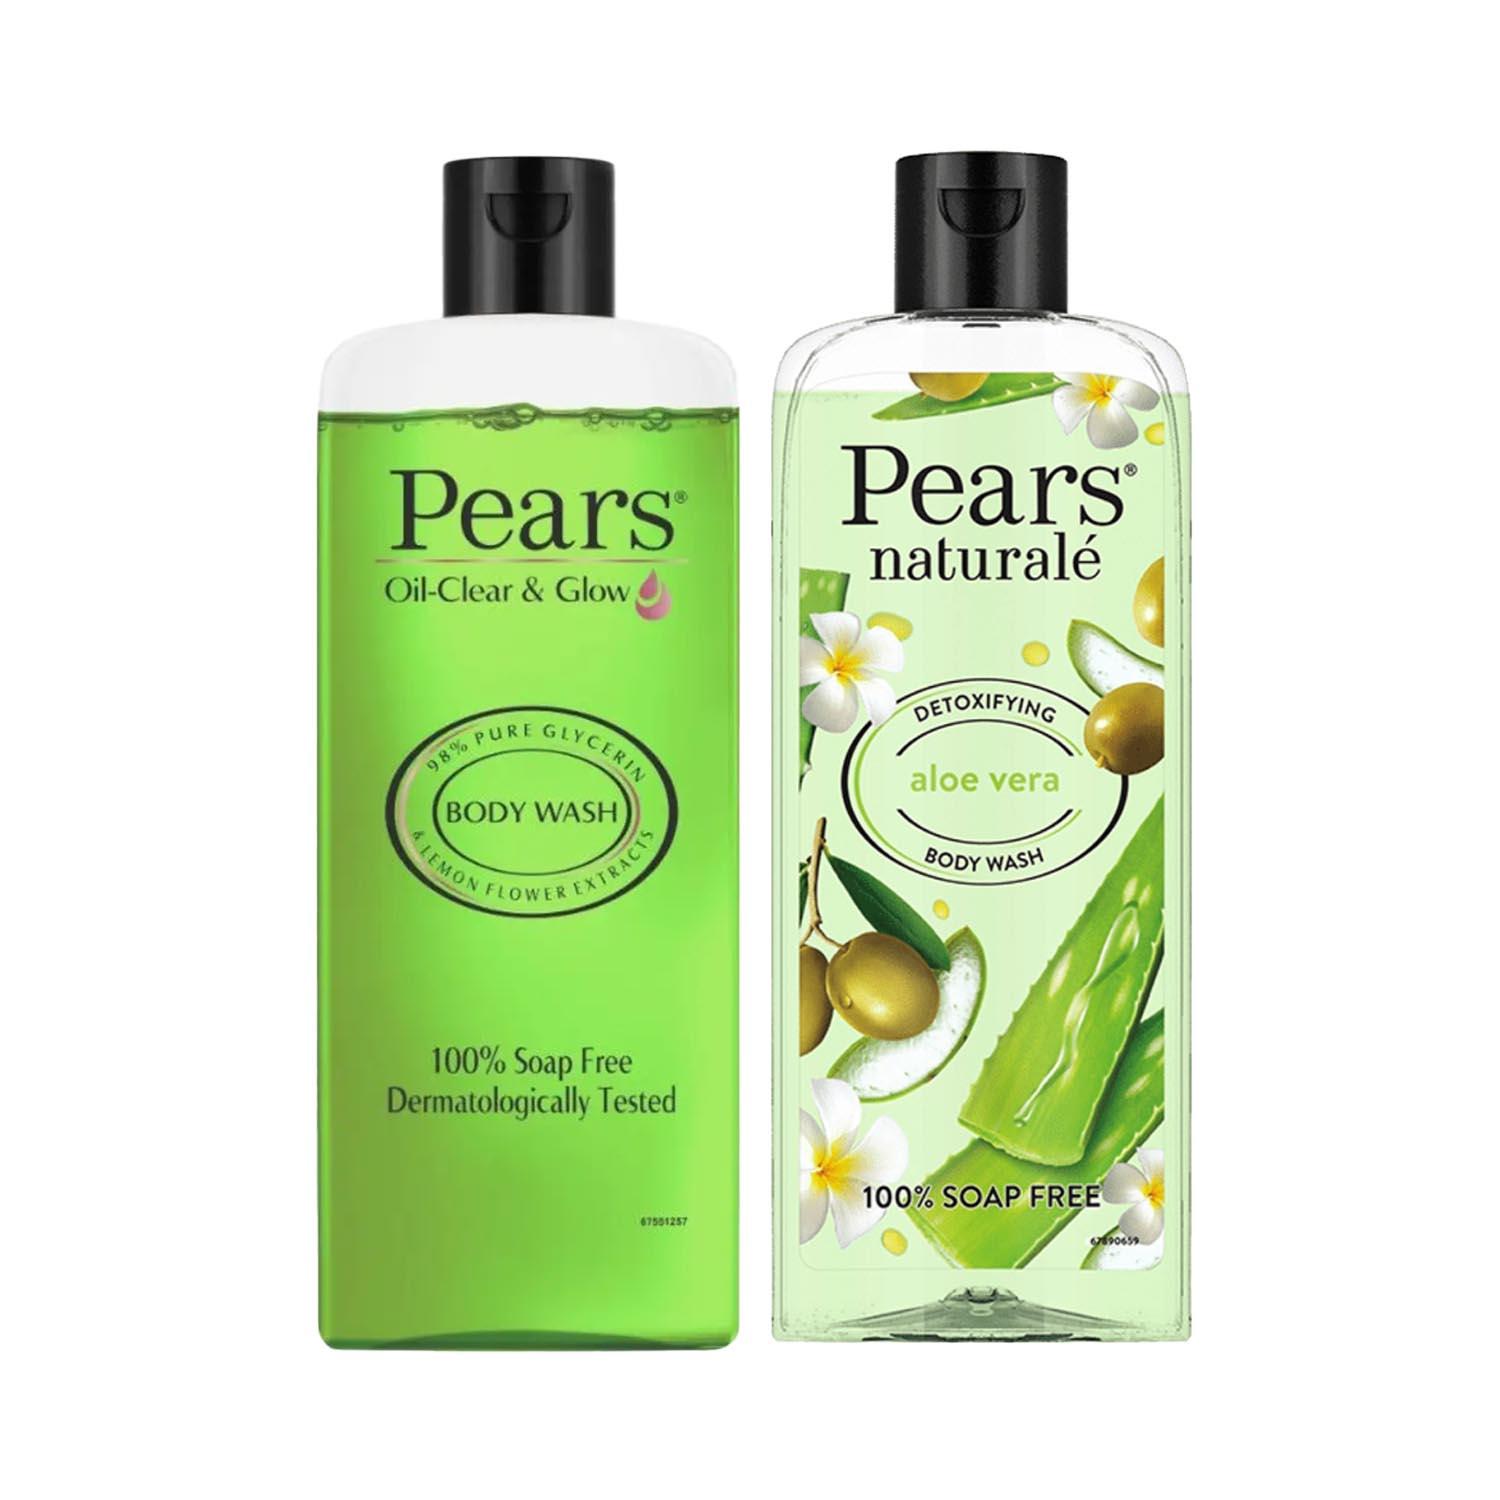 Pears | Pears Oil Clear & Glow And Naturale Detoxifying Aloevera Body Wash Combo